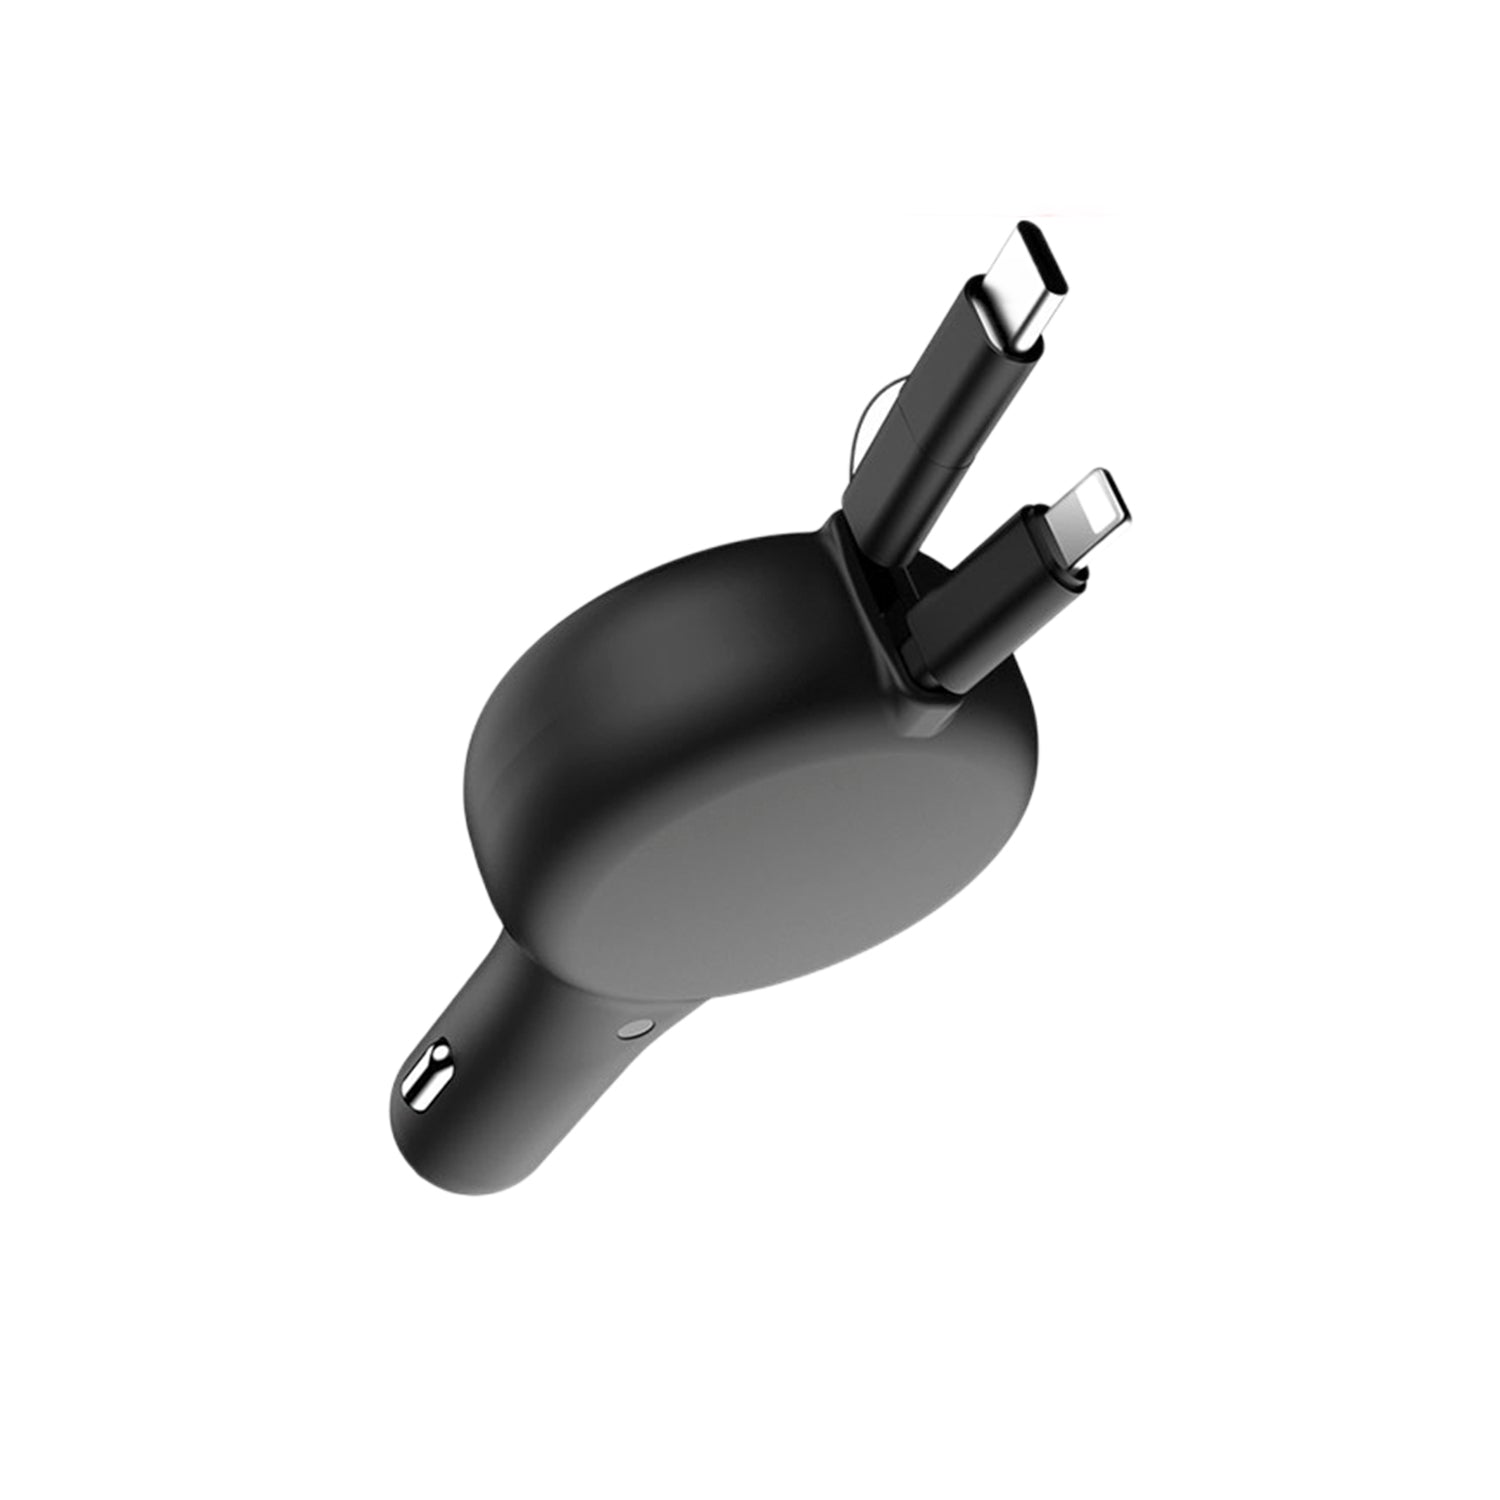 3 in 1  QC 3.0/PD  quick car charger with retractable charging cable